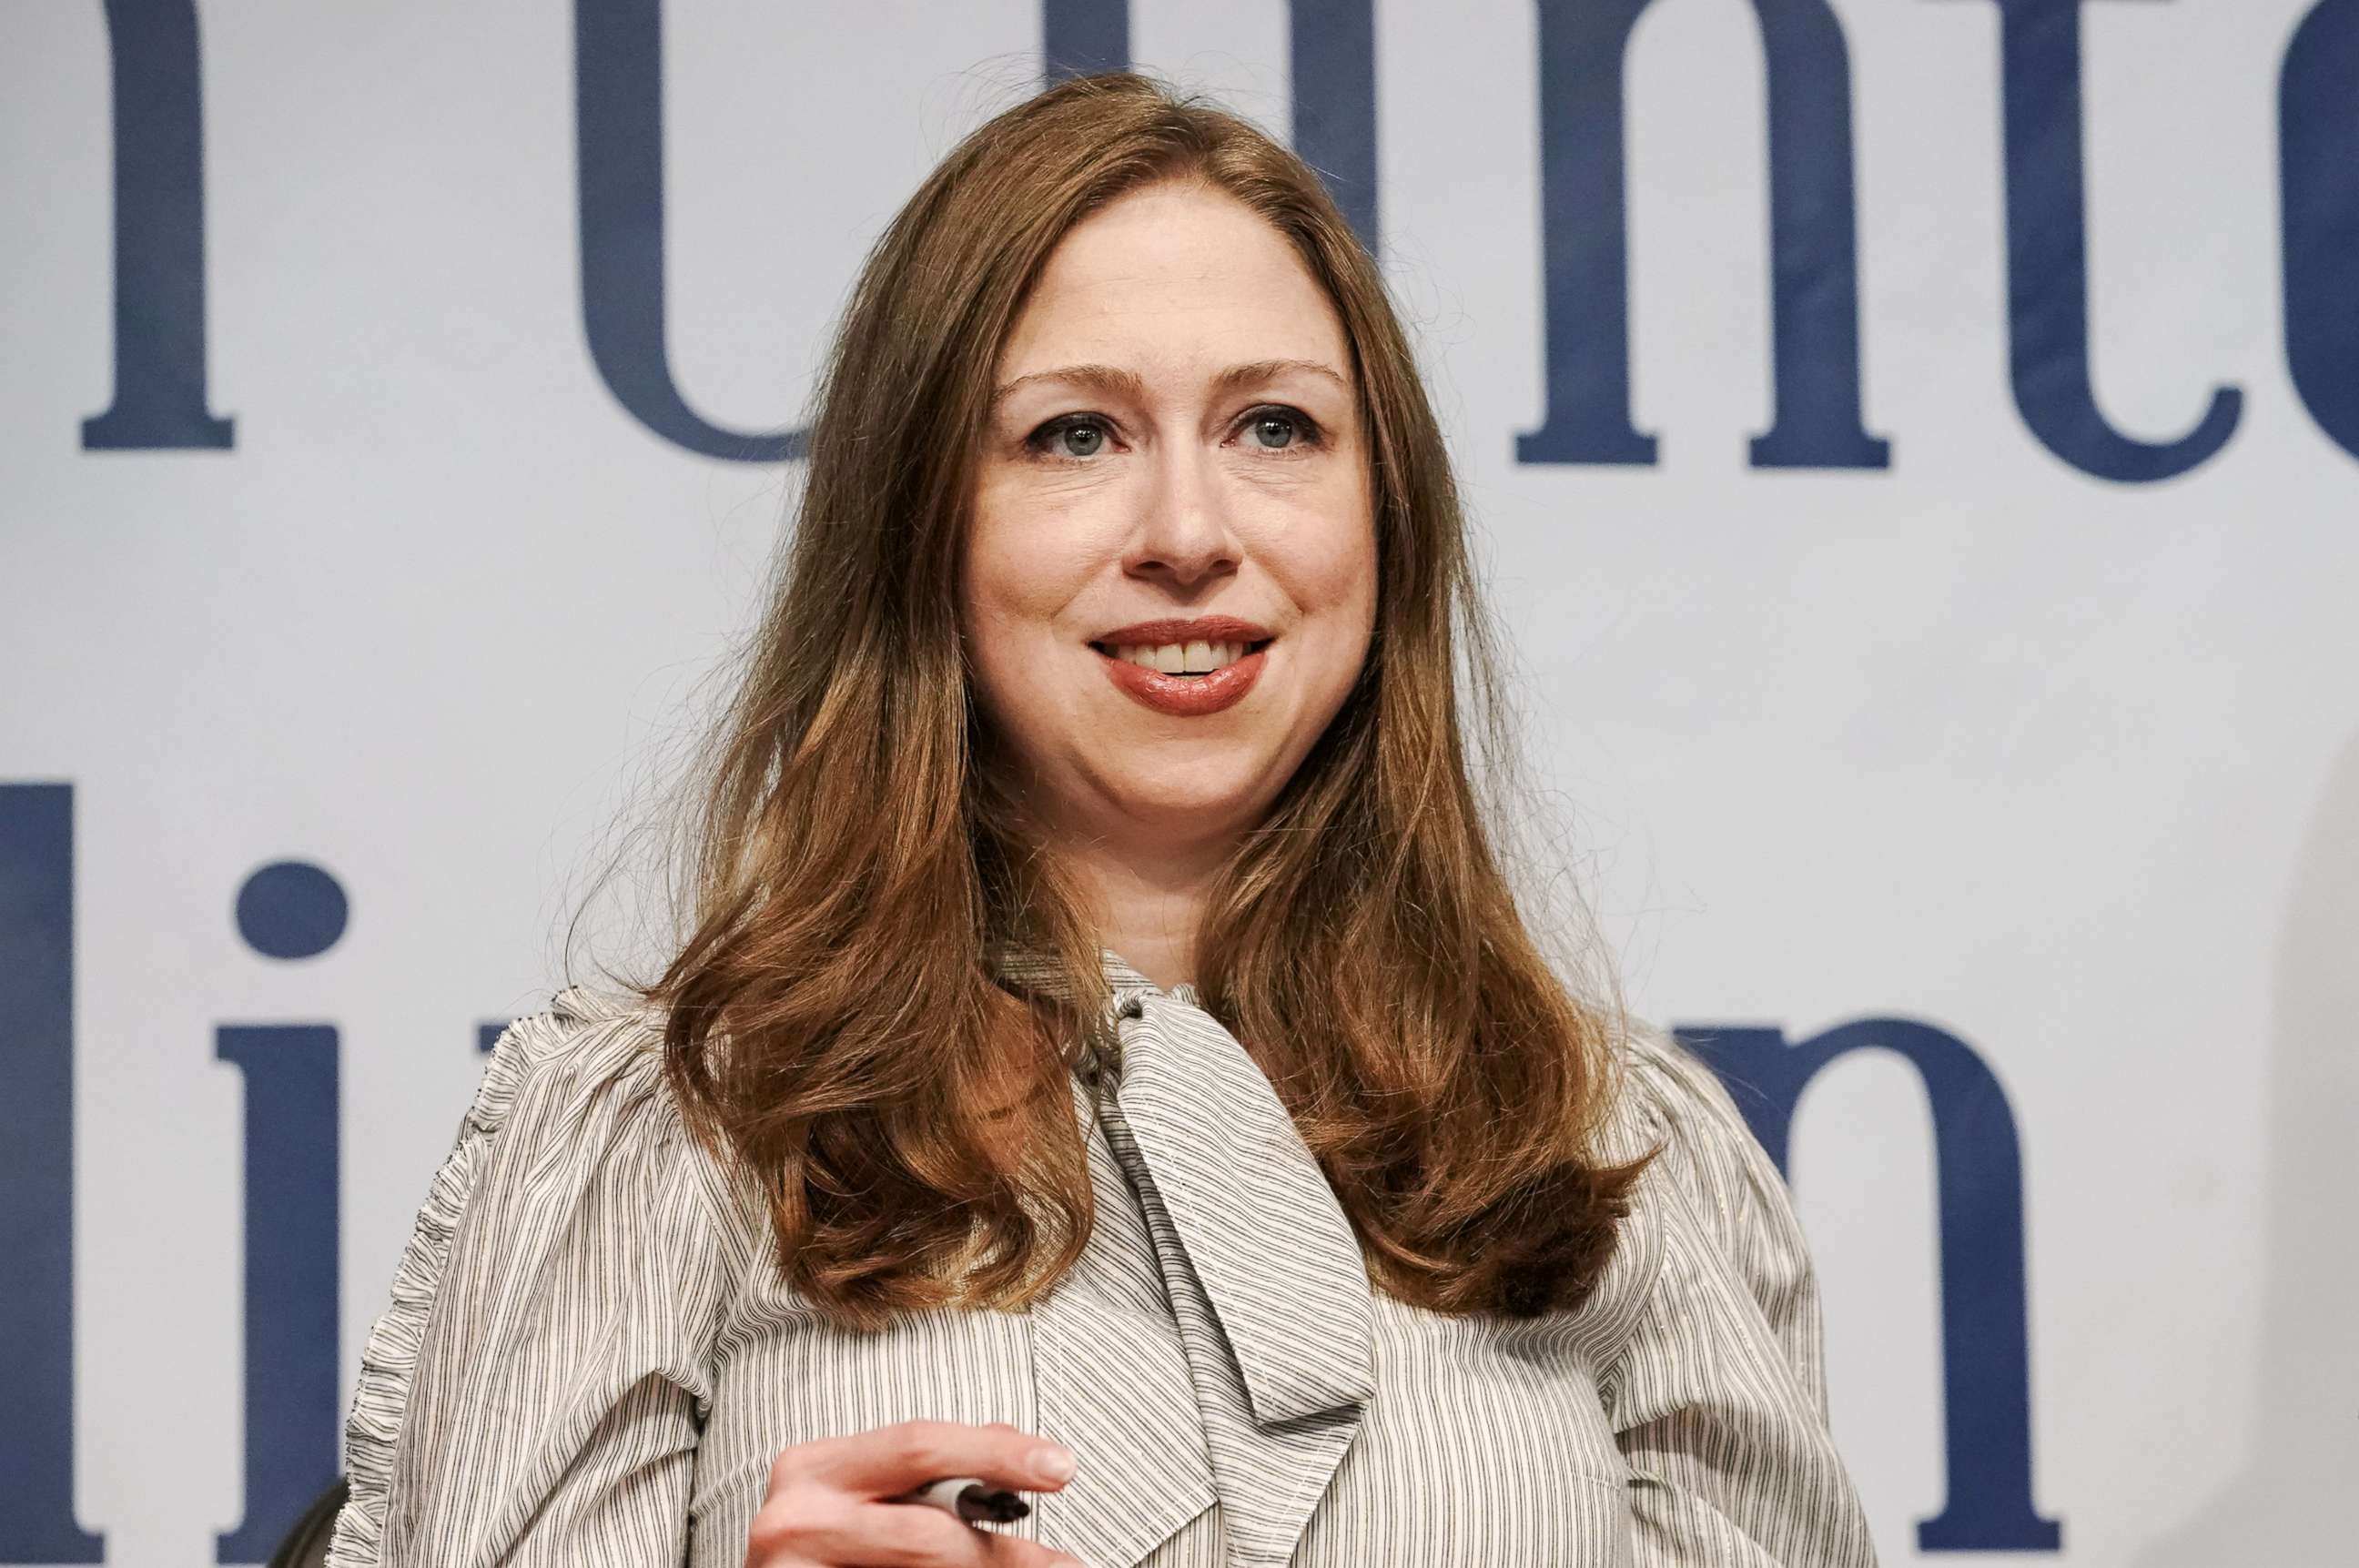 PHOTO: Chelsea Clinton signs a book during an event for "The Book of Gutsy Women," a book by her and her mother Hillary Clinton, in New York, Oct. 3, 2019.